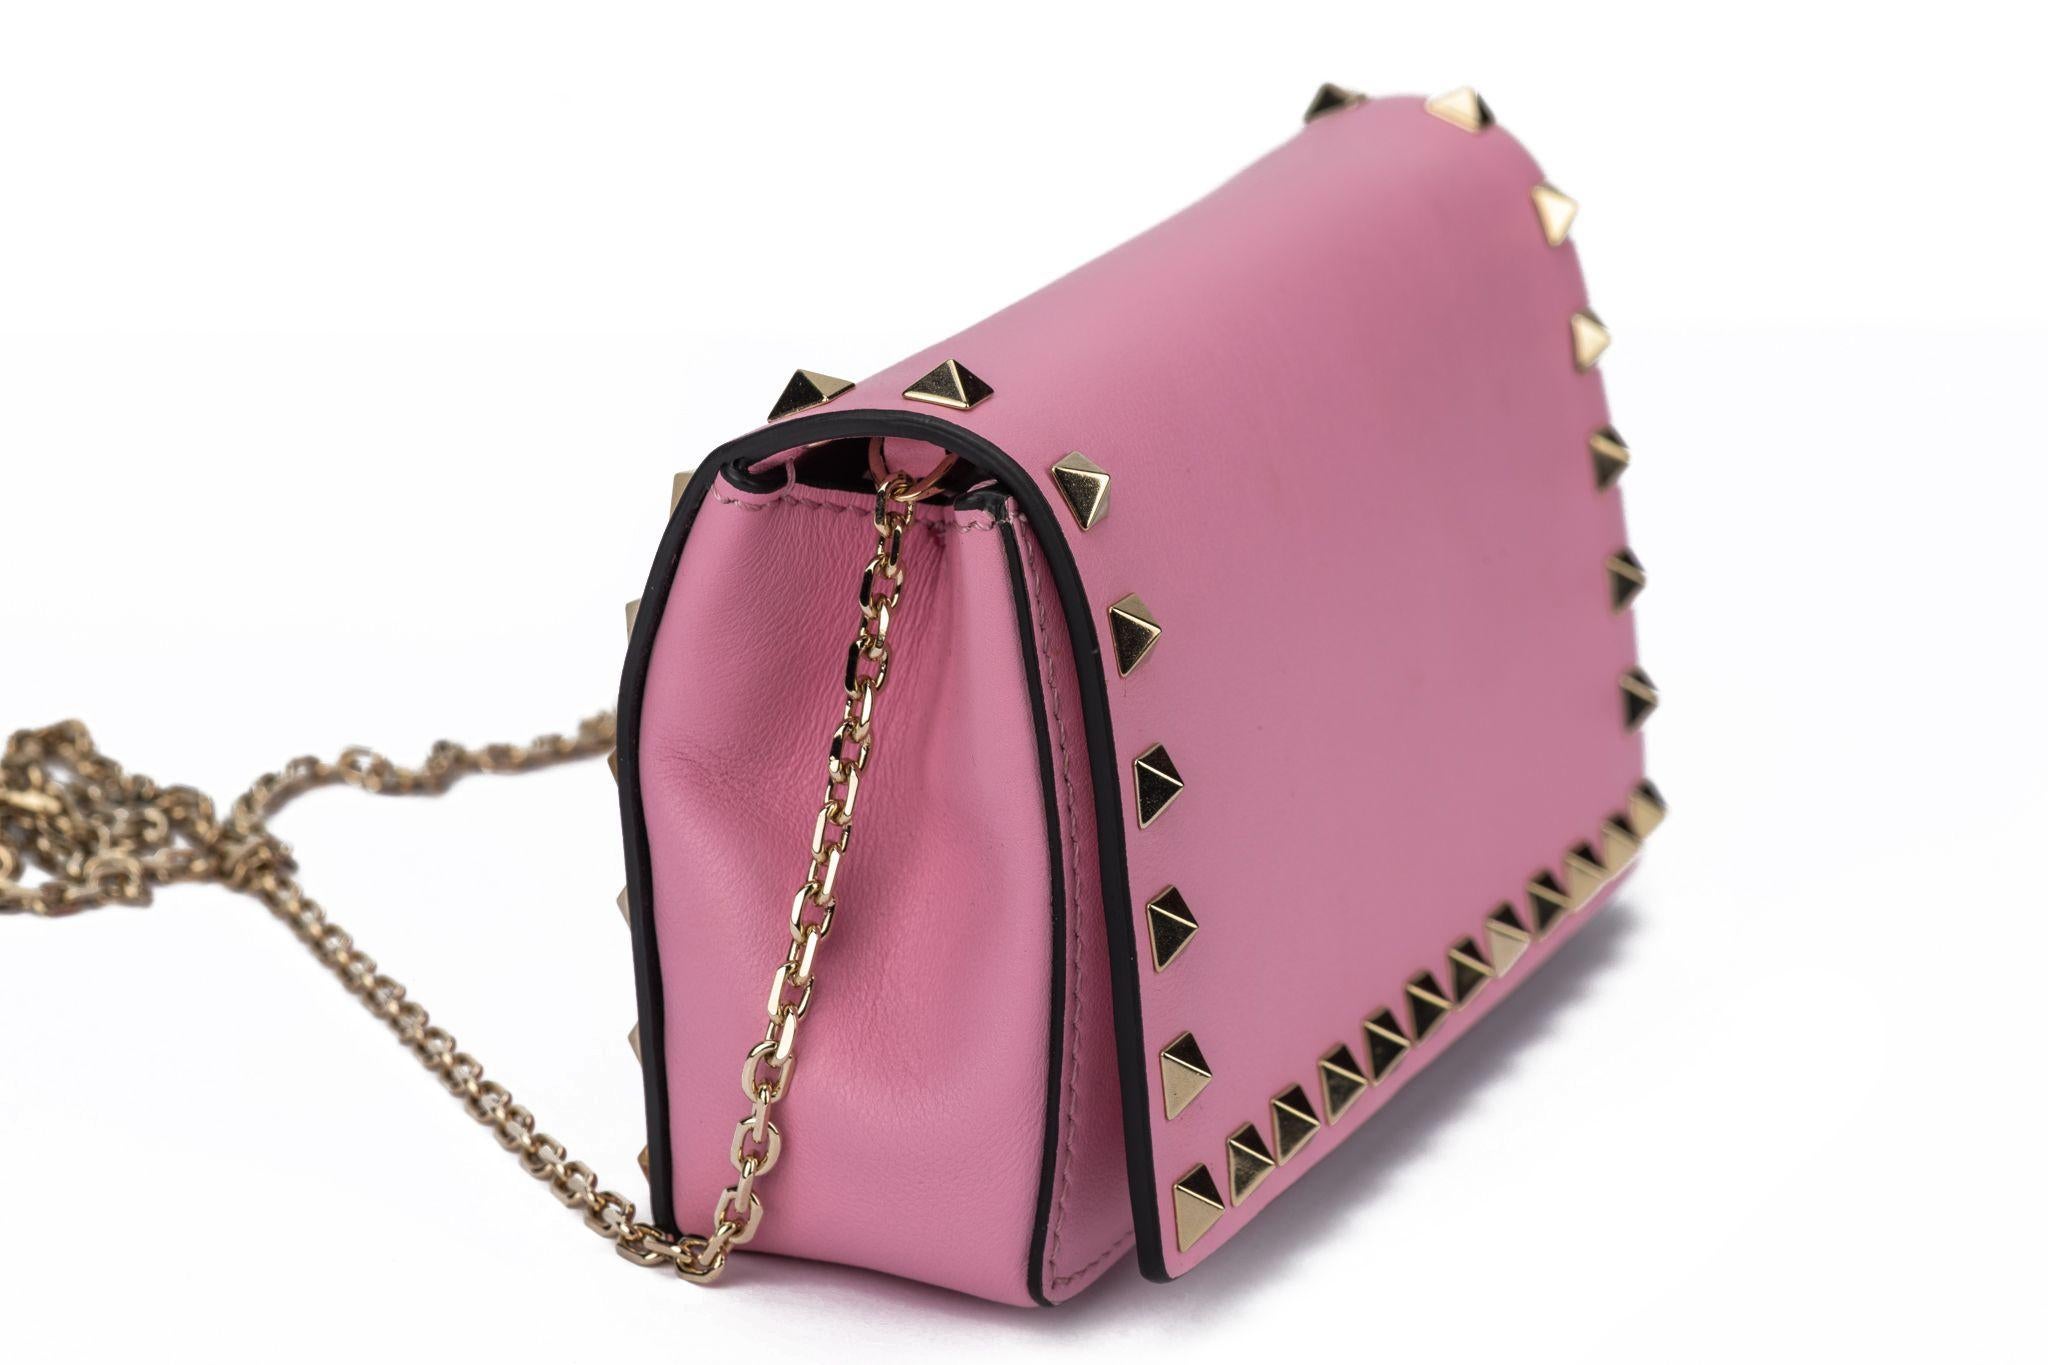 Valentino Rockstud Pink Crossbody Bag In New Condition For Sale In West Hollywood, CA